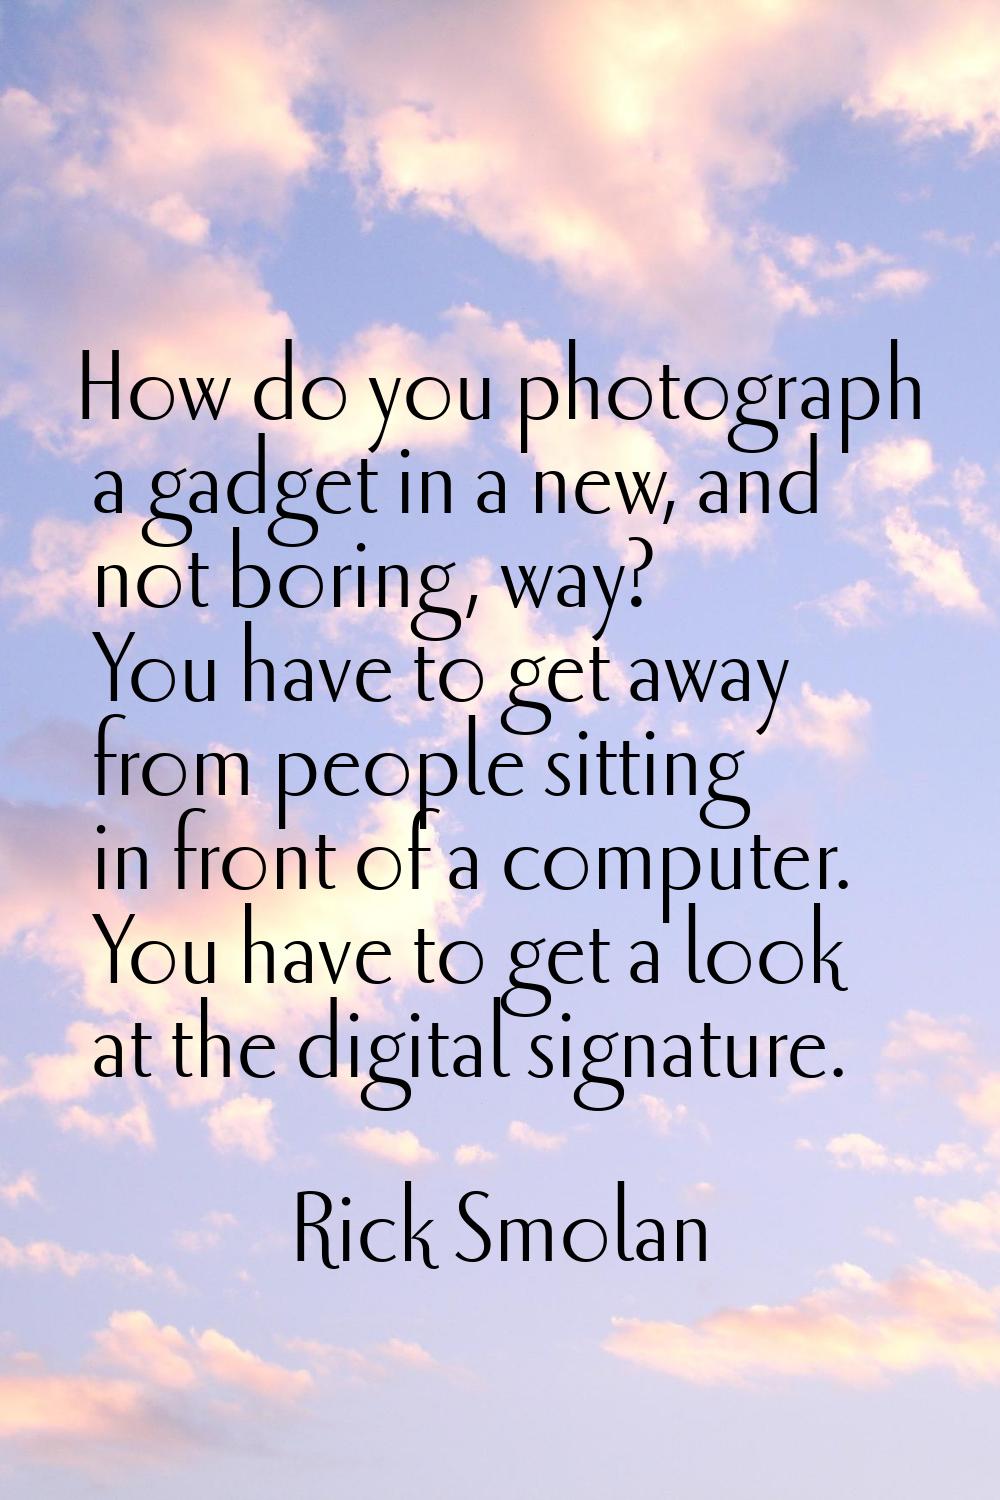 How do you photograph a gadget in a new, and not boring, way? You have to get away from people sitt